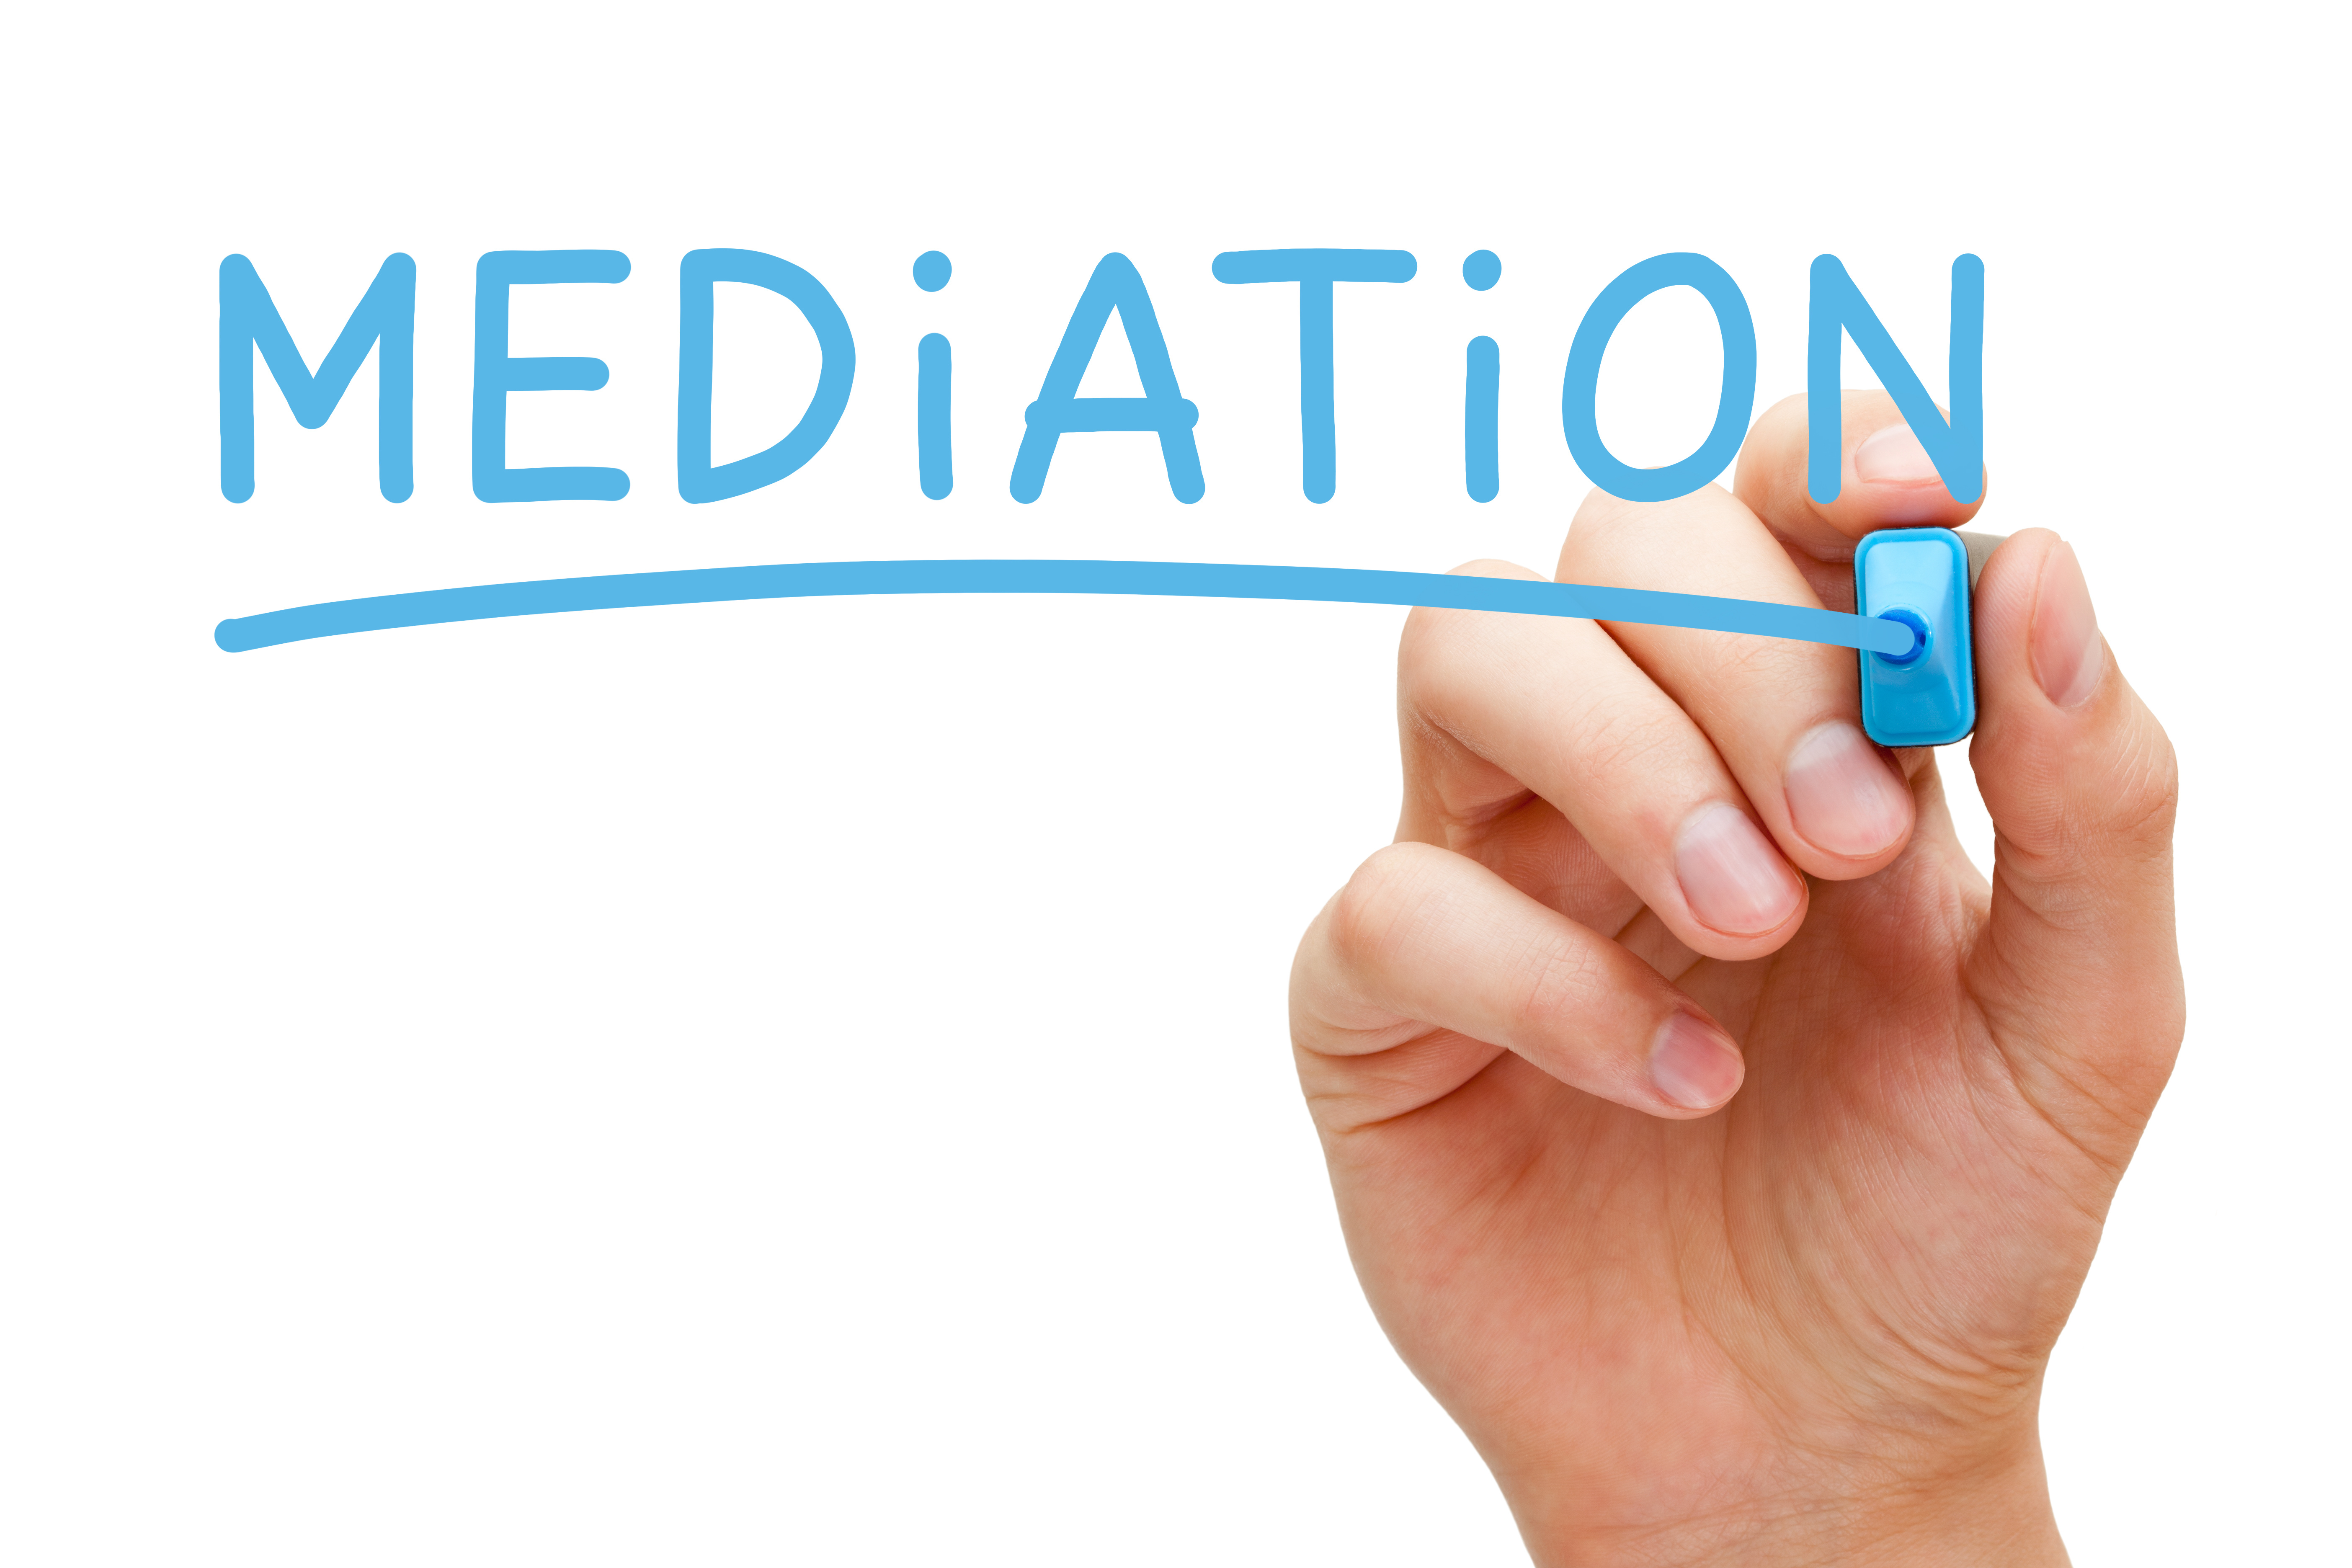 About Mediation